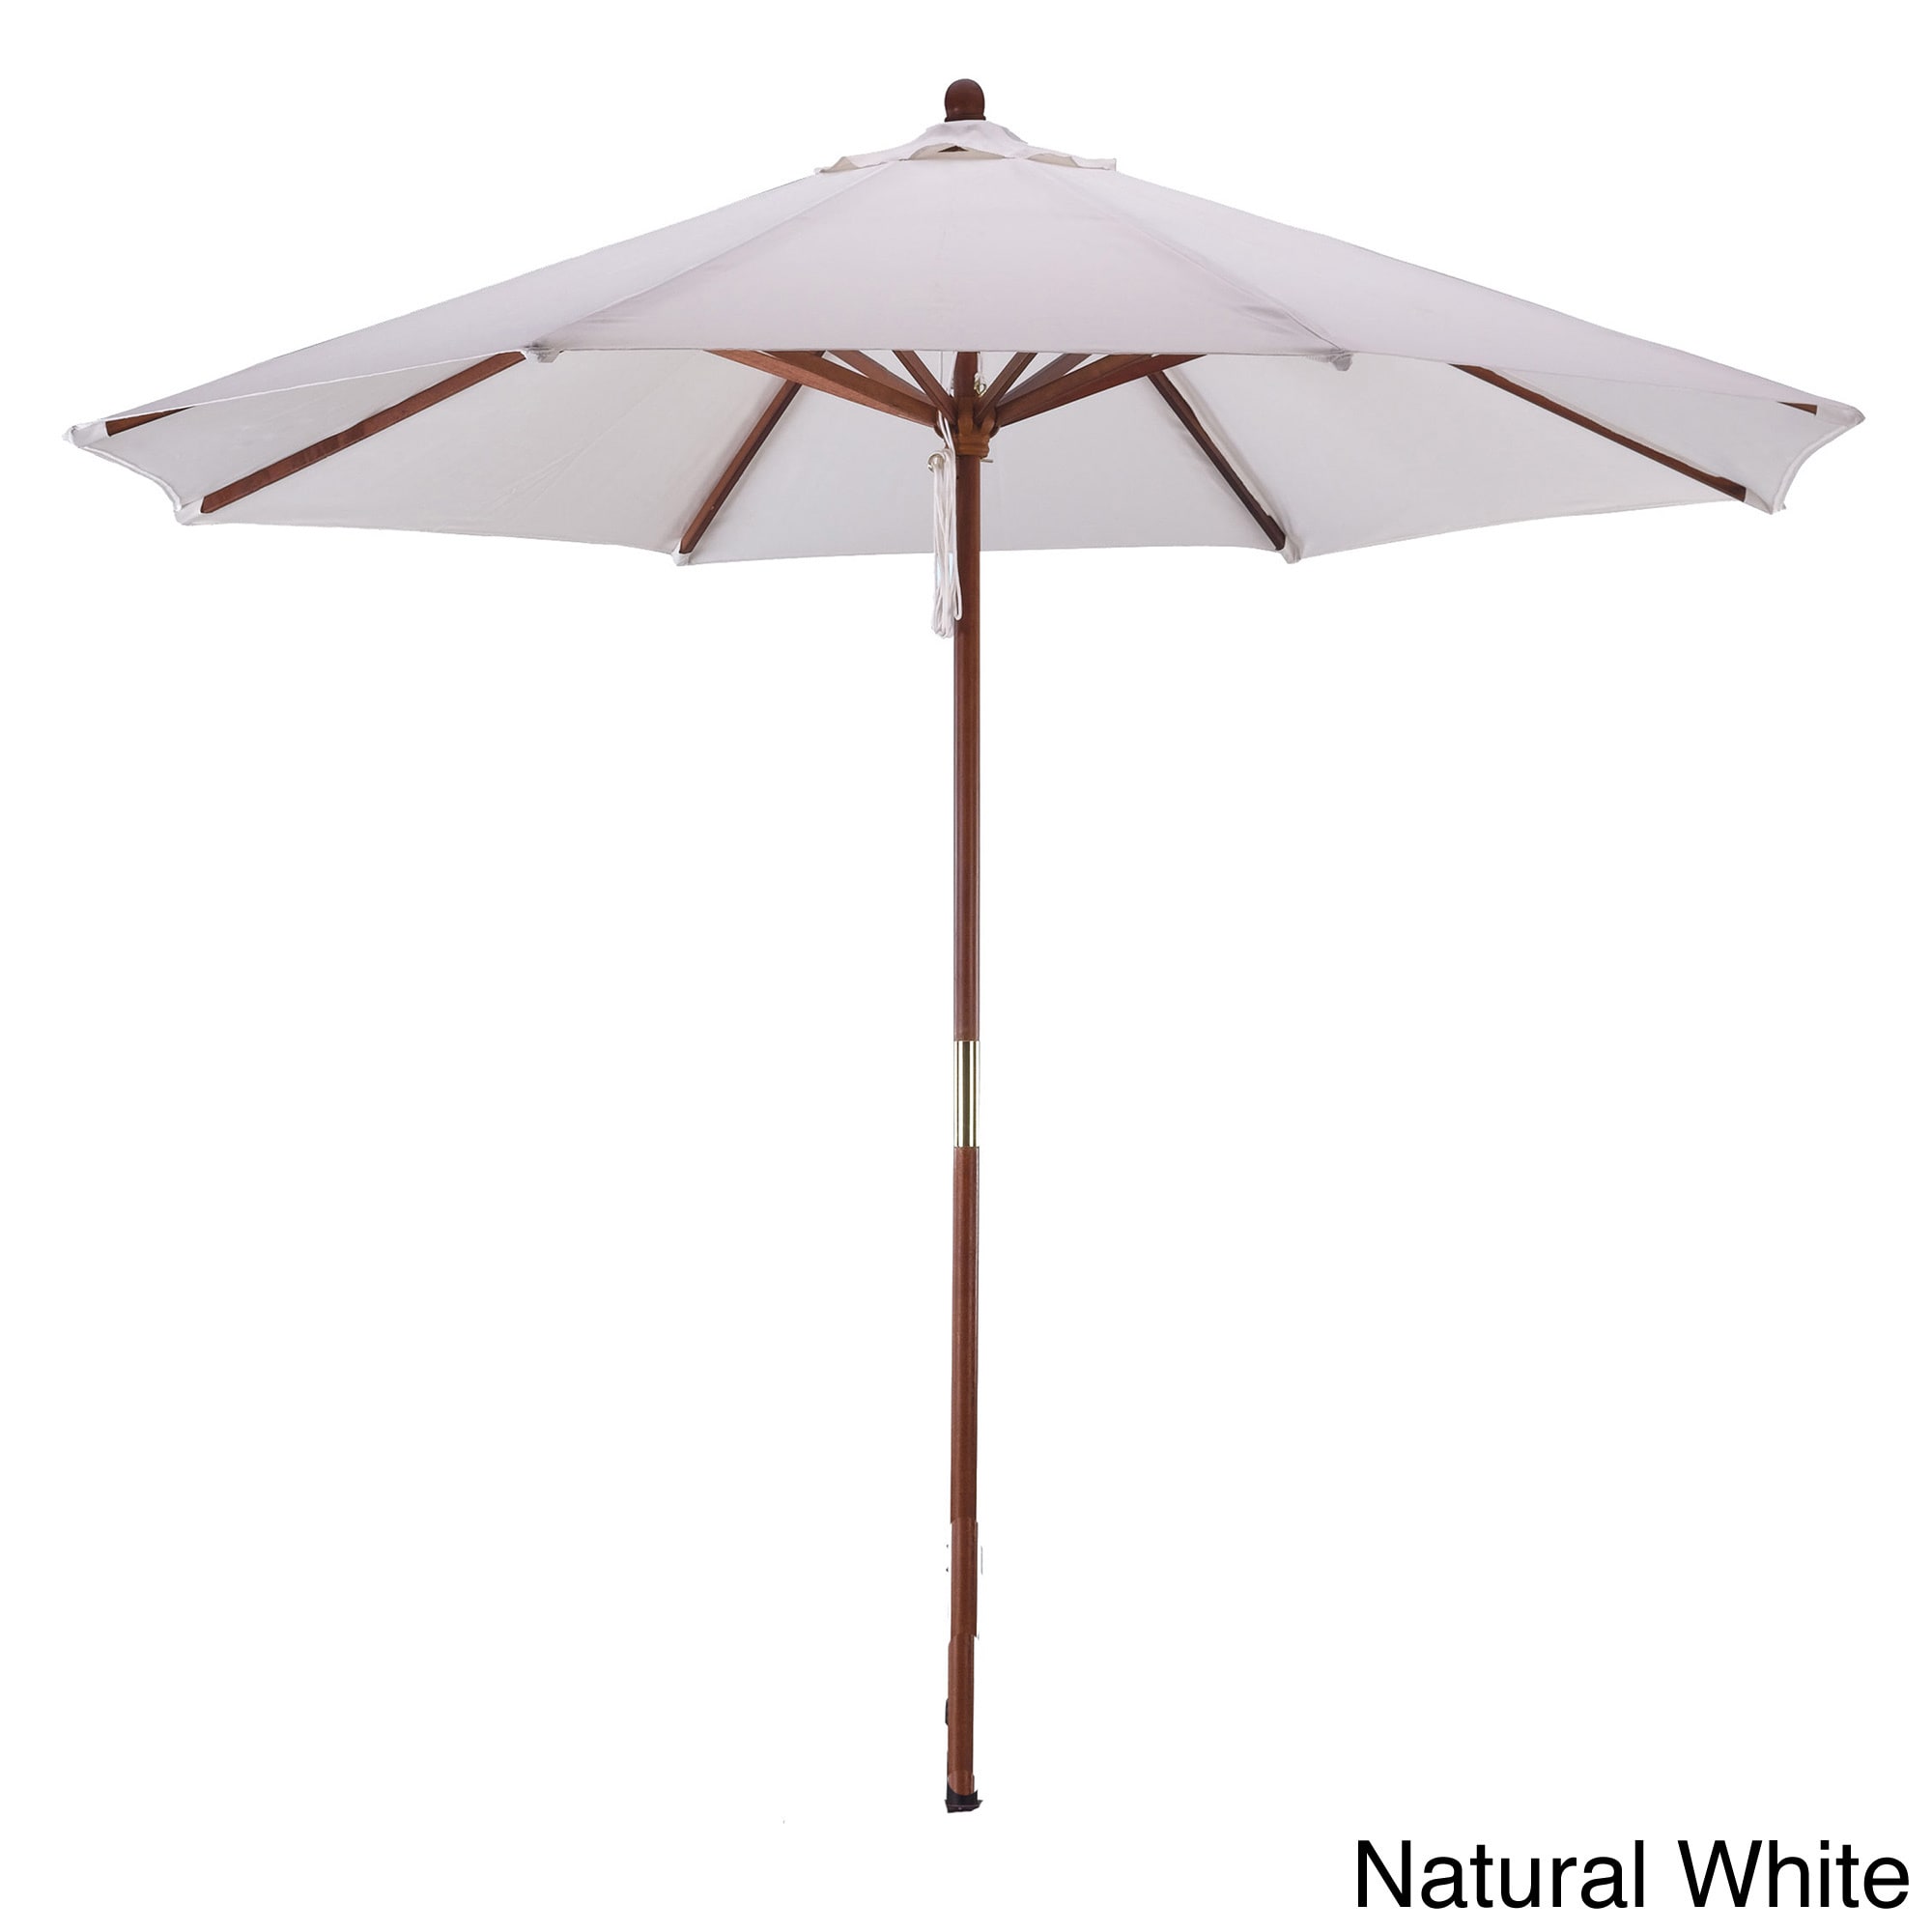 Phat Tommy Phat Tommy 9 foot Market Umbrella White Size 9 foot